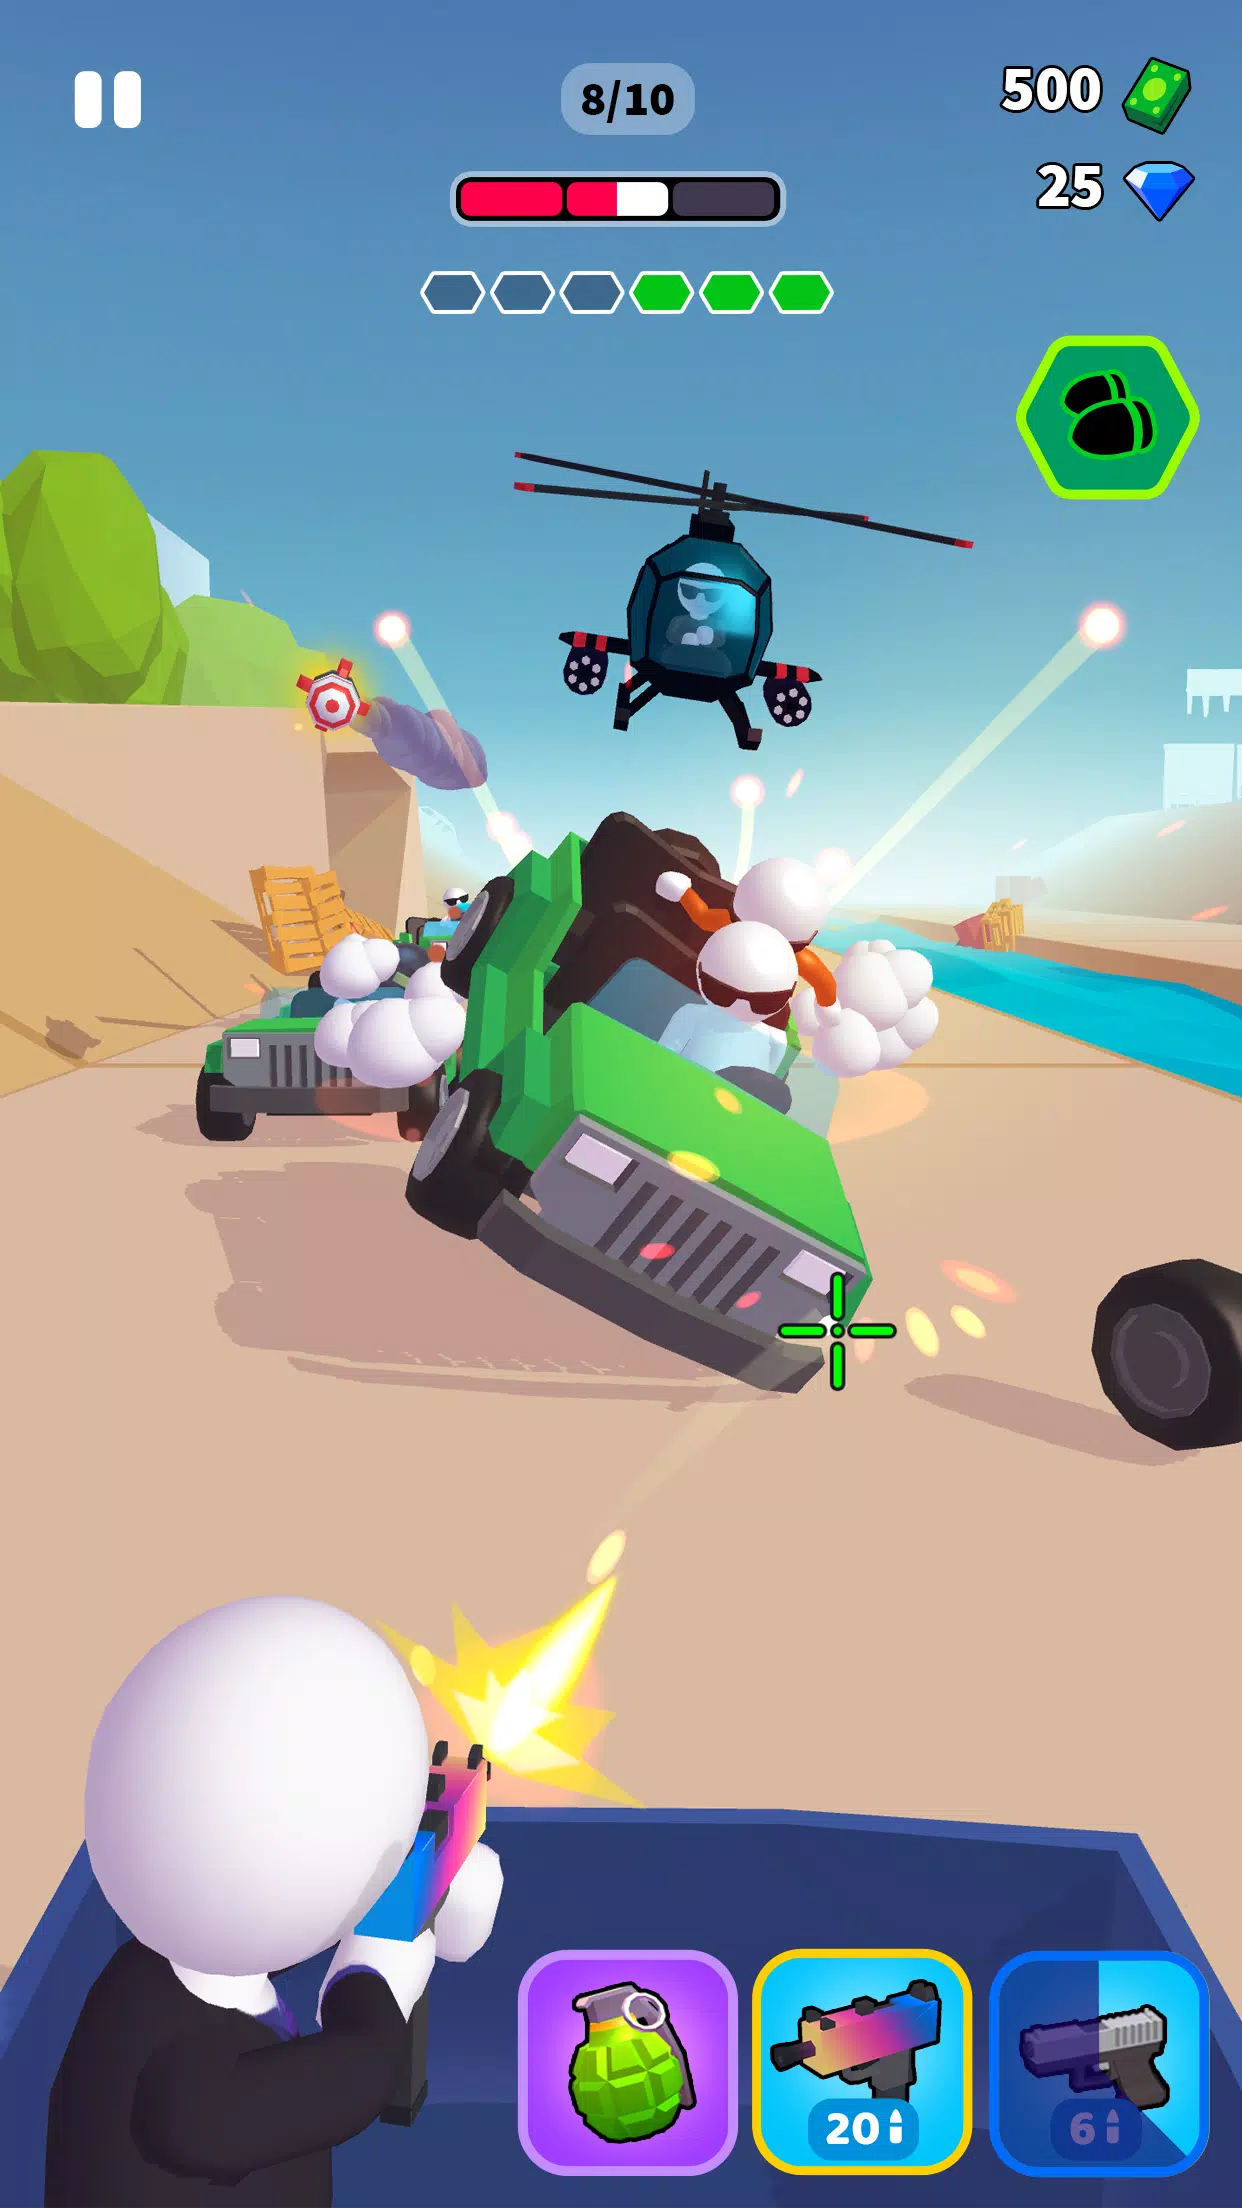 Even though the animation on the game's vertical screen is quite basic, the racing video game Rage Road incorporates real-world traffic obstacles into the game play